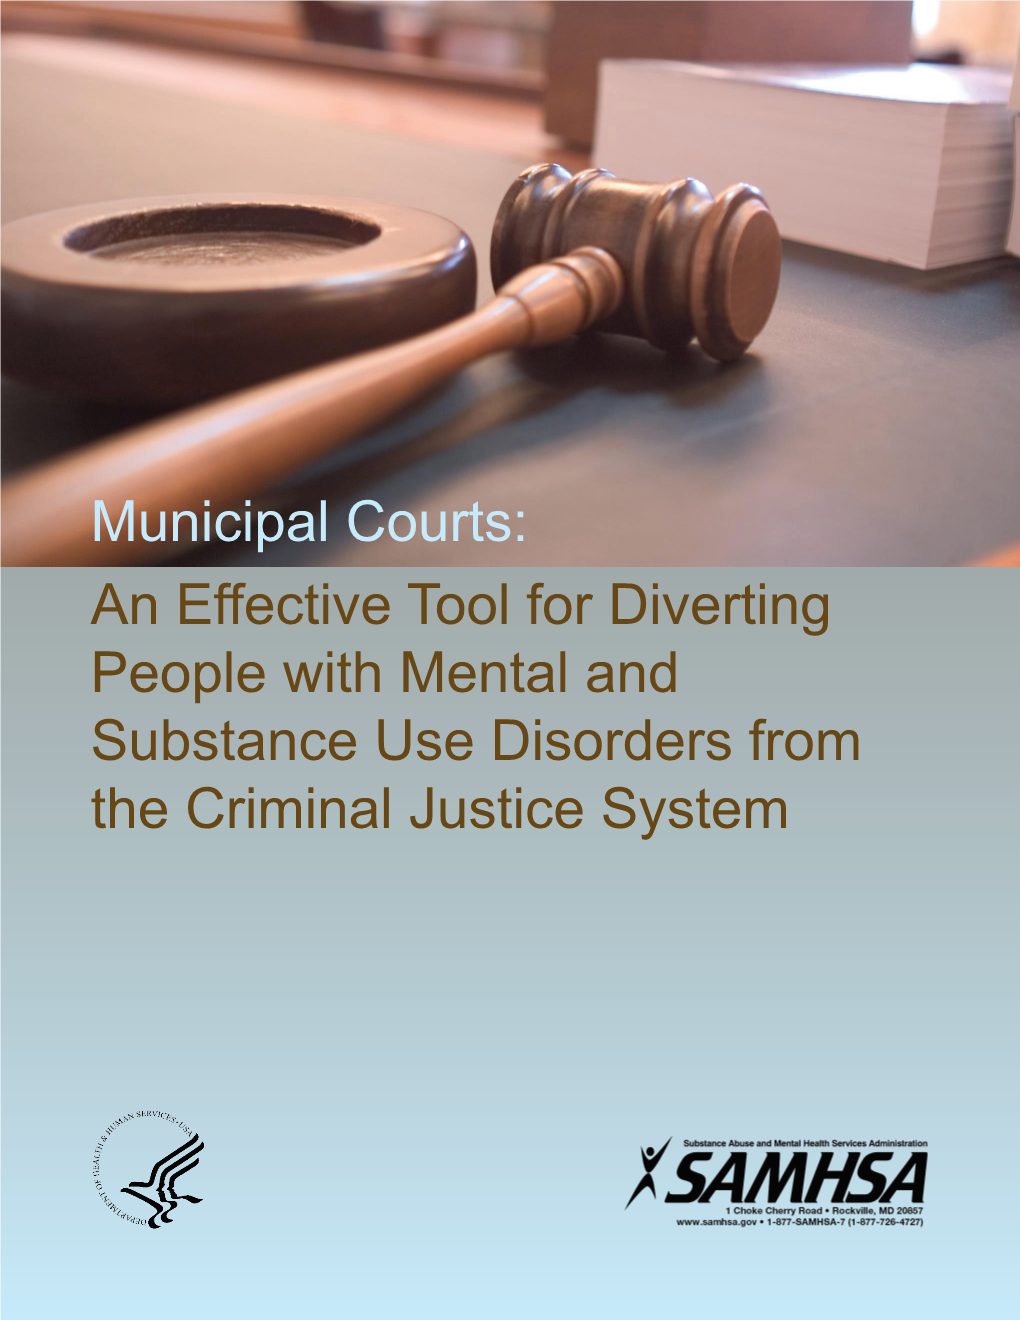 Municipal Courts: an Effective Tool for Diverting People with Mental and Substance Use Disorders from the Criminal Justice System